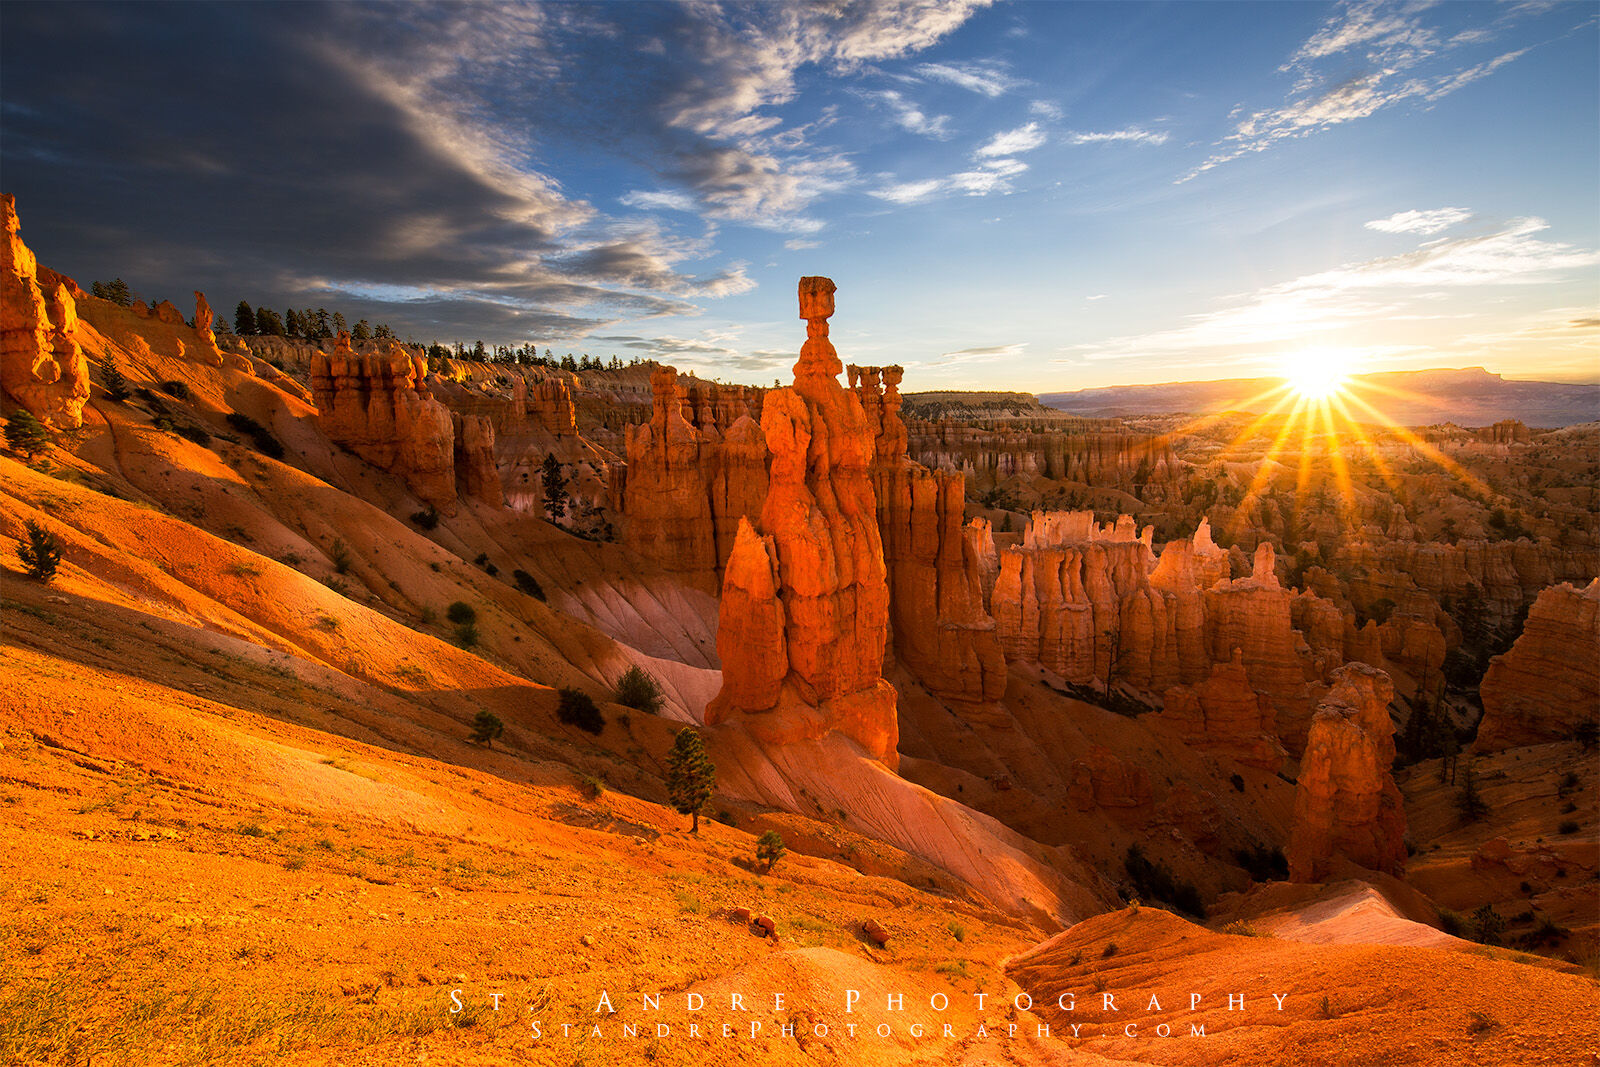 A large hoodoo is in the middle of the image. The hoodoo is Thor's Hammer in Bryce Canyon National Park in southern Utah. 